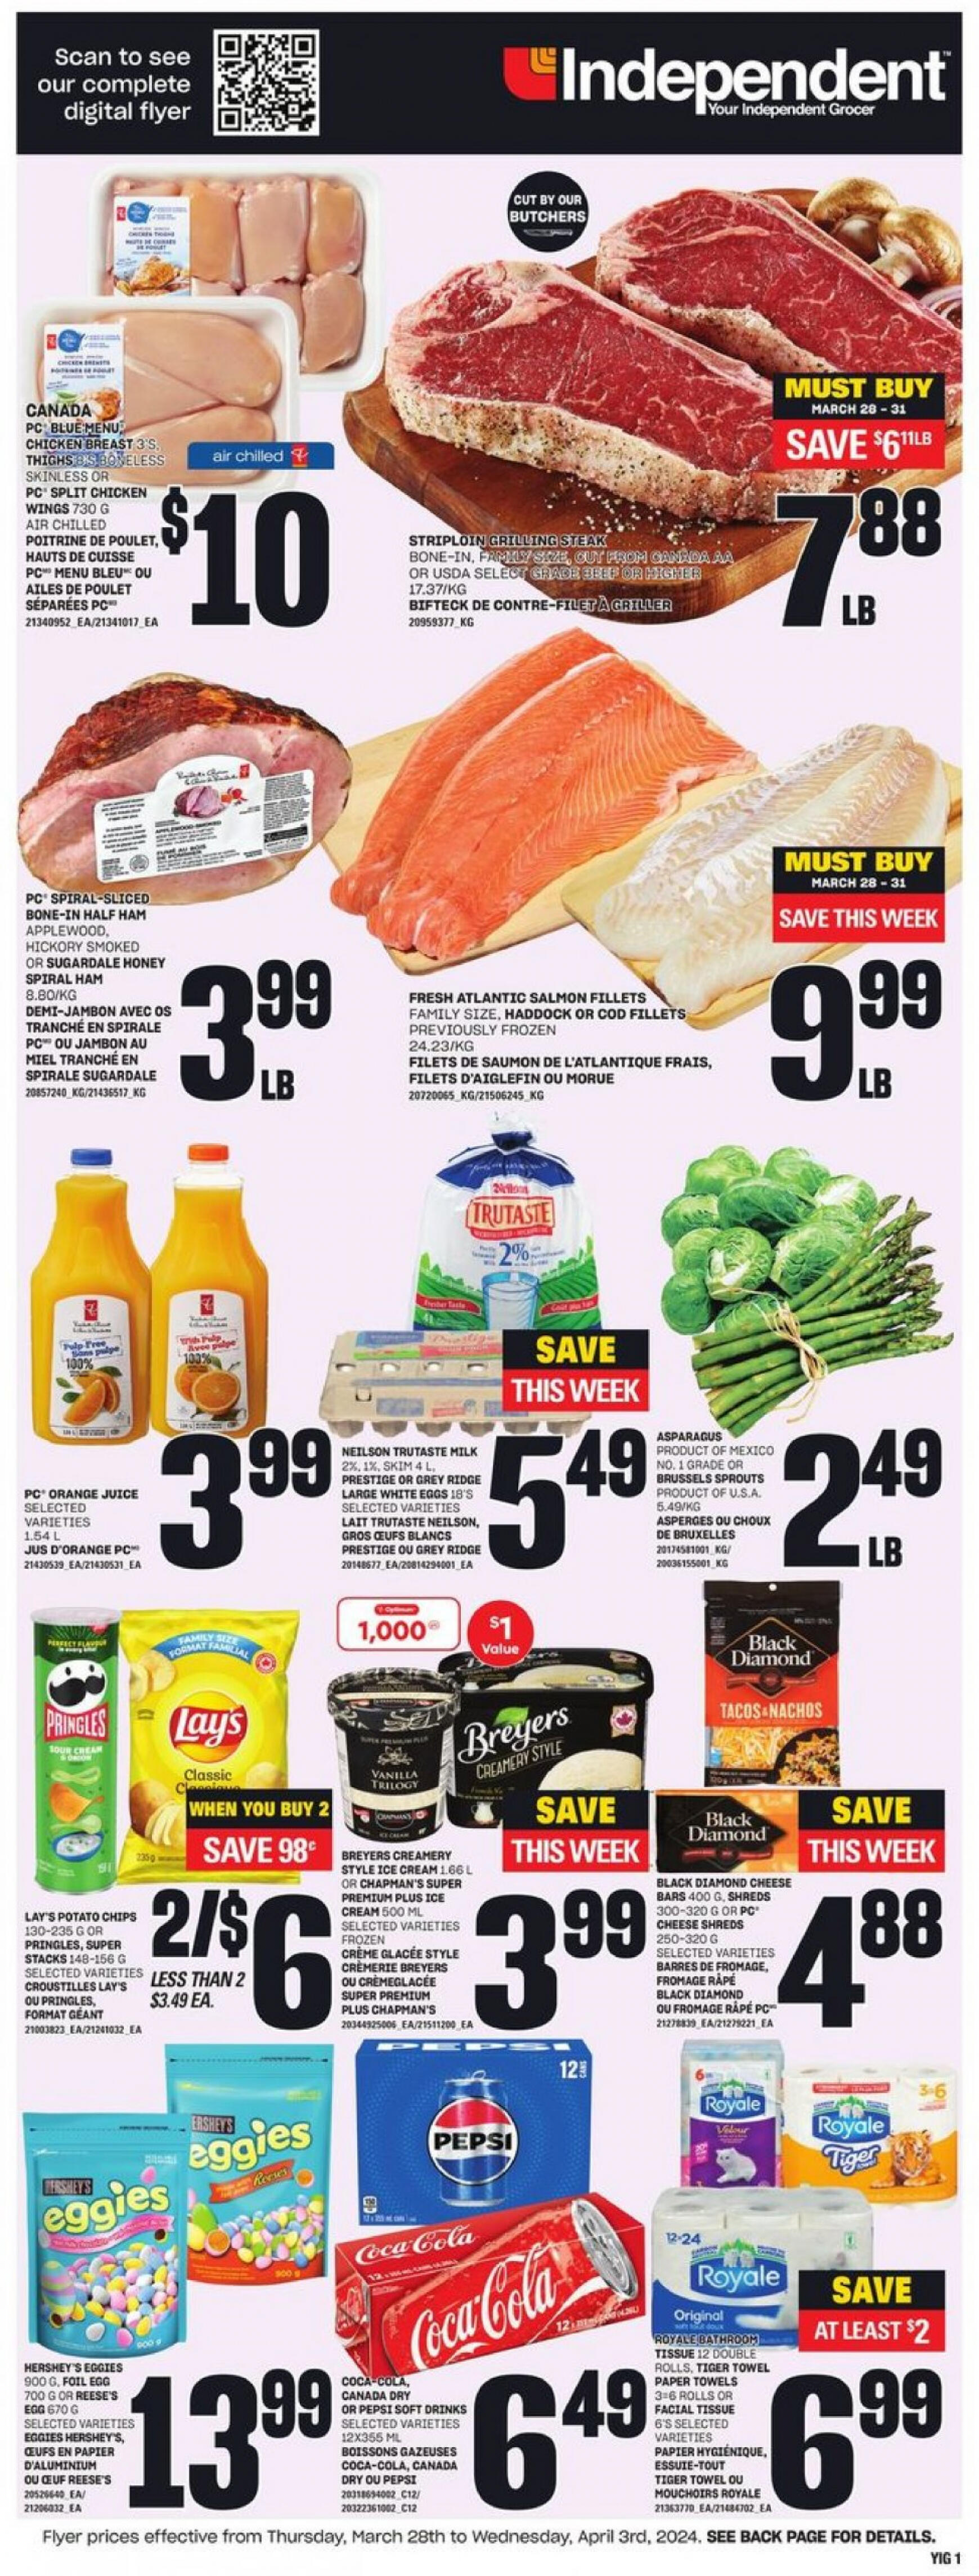 independent-grocery - Independent Grocery valid from 28.03.2024 - page: 5